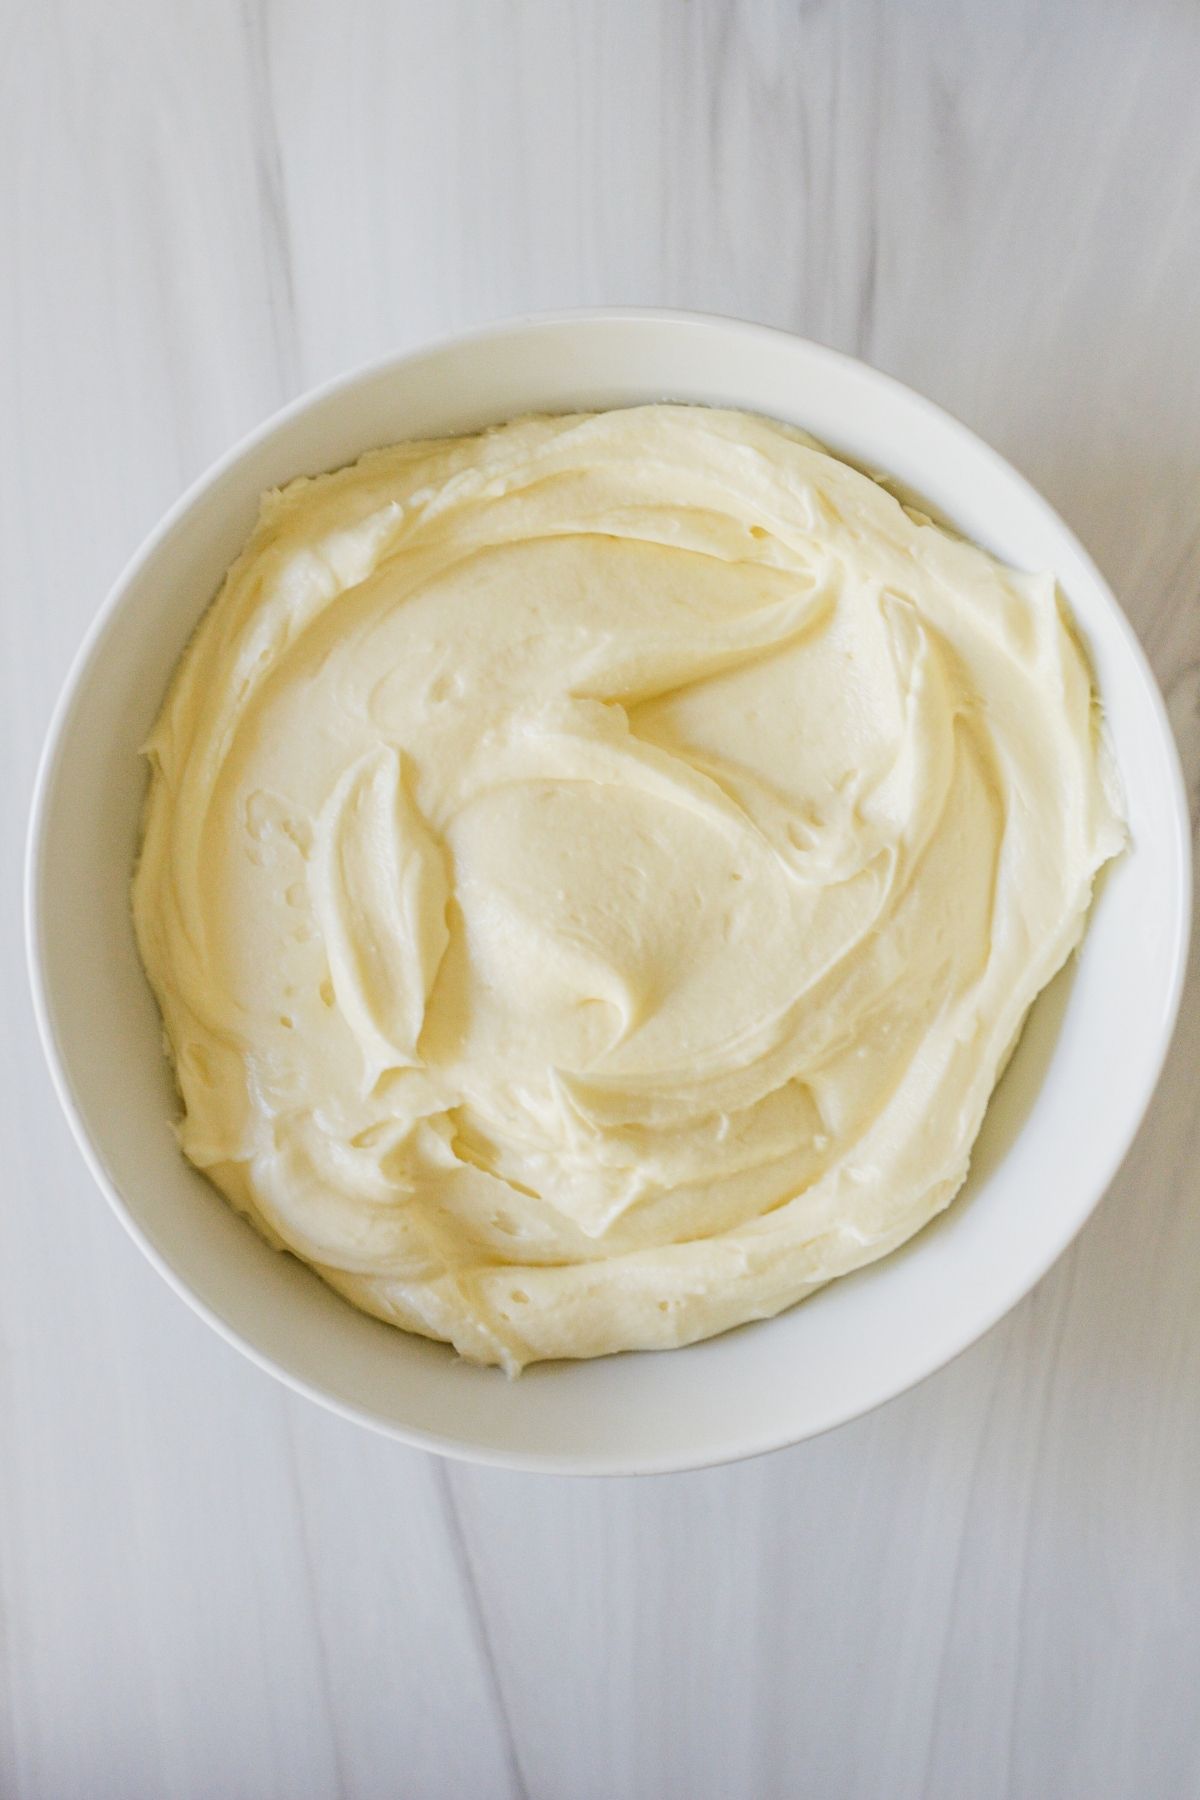 Cream cheese frosting is made with cream cheese, powdered sugar, vanilla and butter.